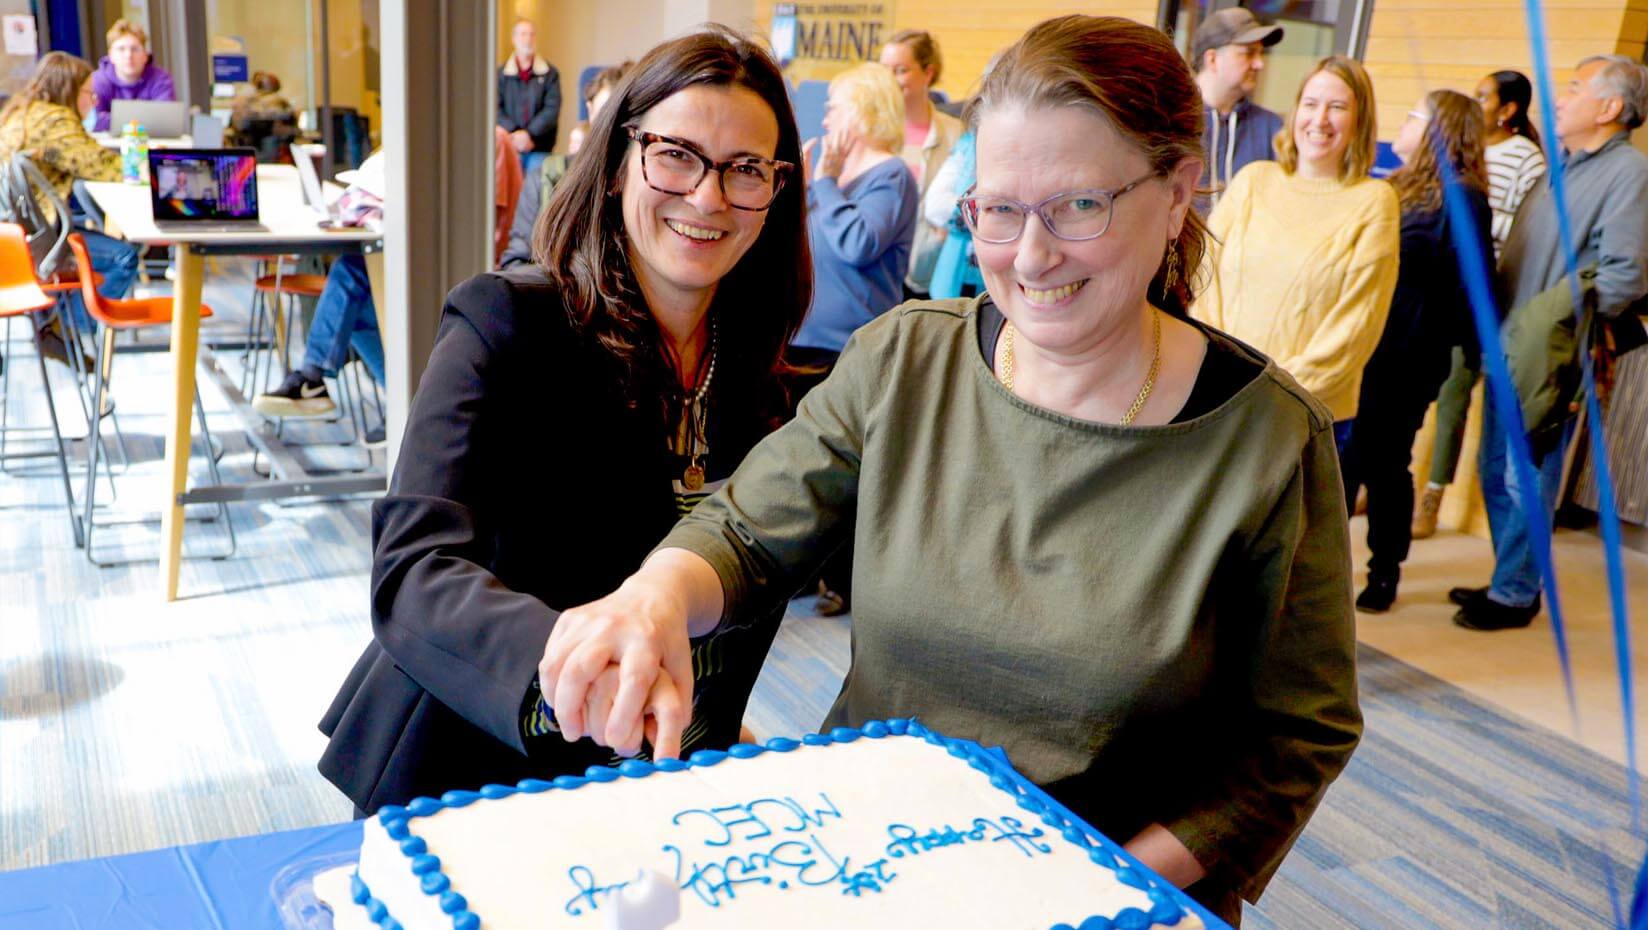 A photo of two people cutting a cake